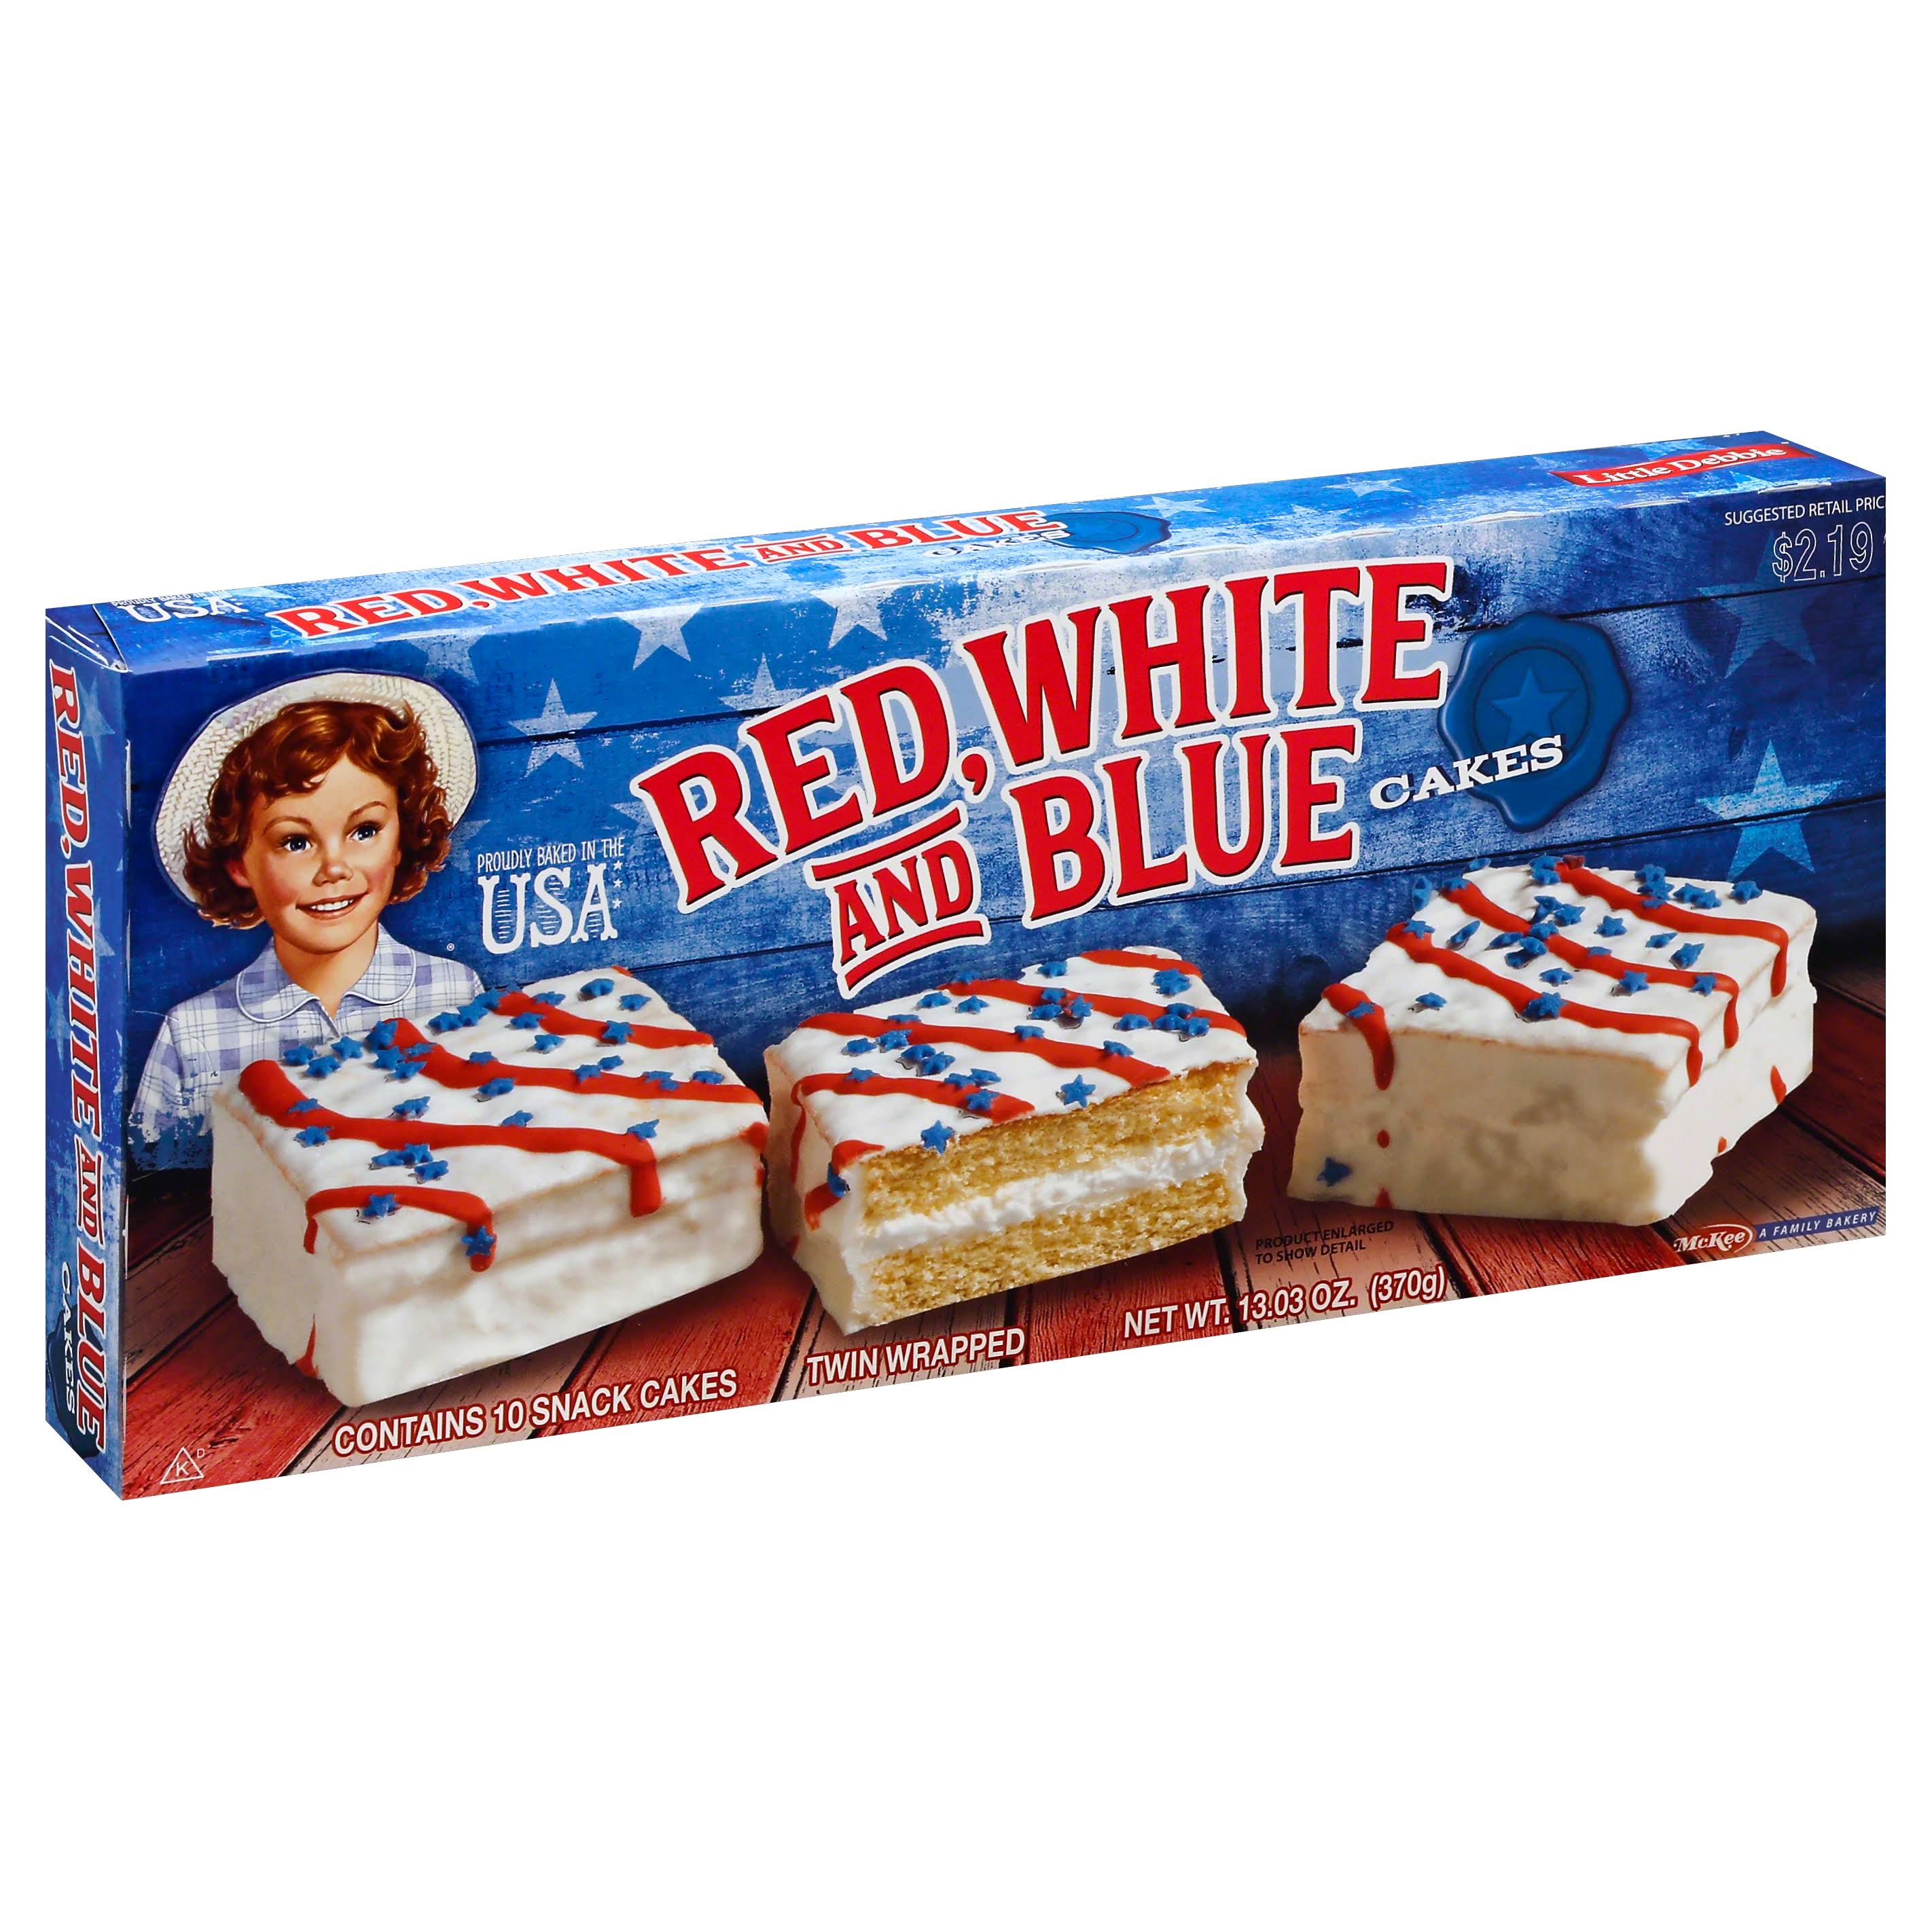 Little Debbie Cakes, Red White and Blue, Twin Wrapped - 13.03 oz